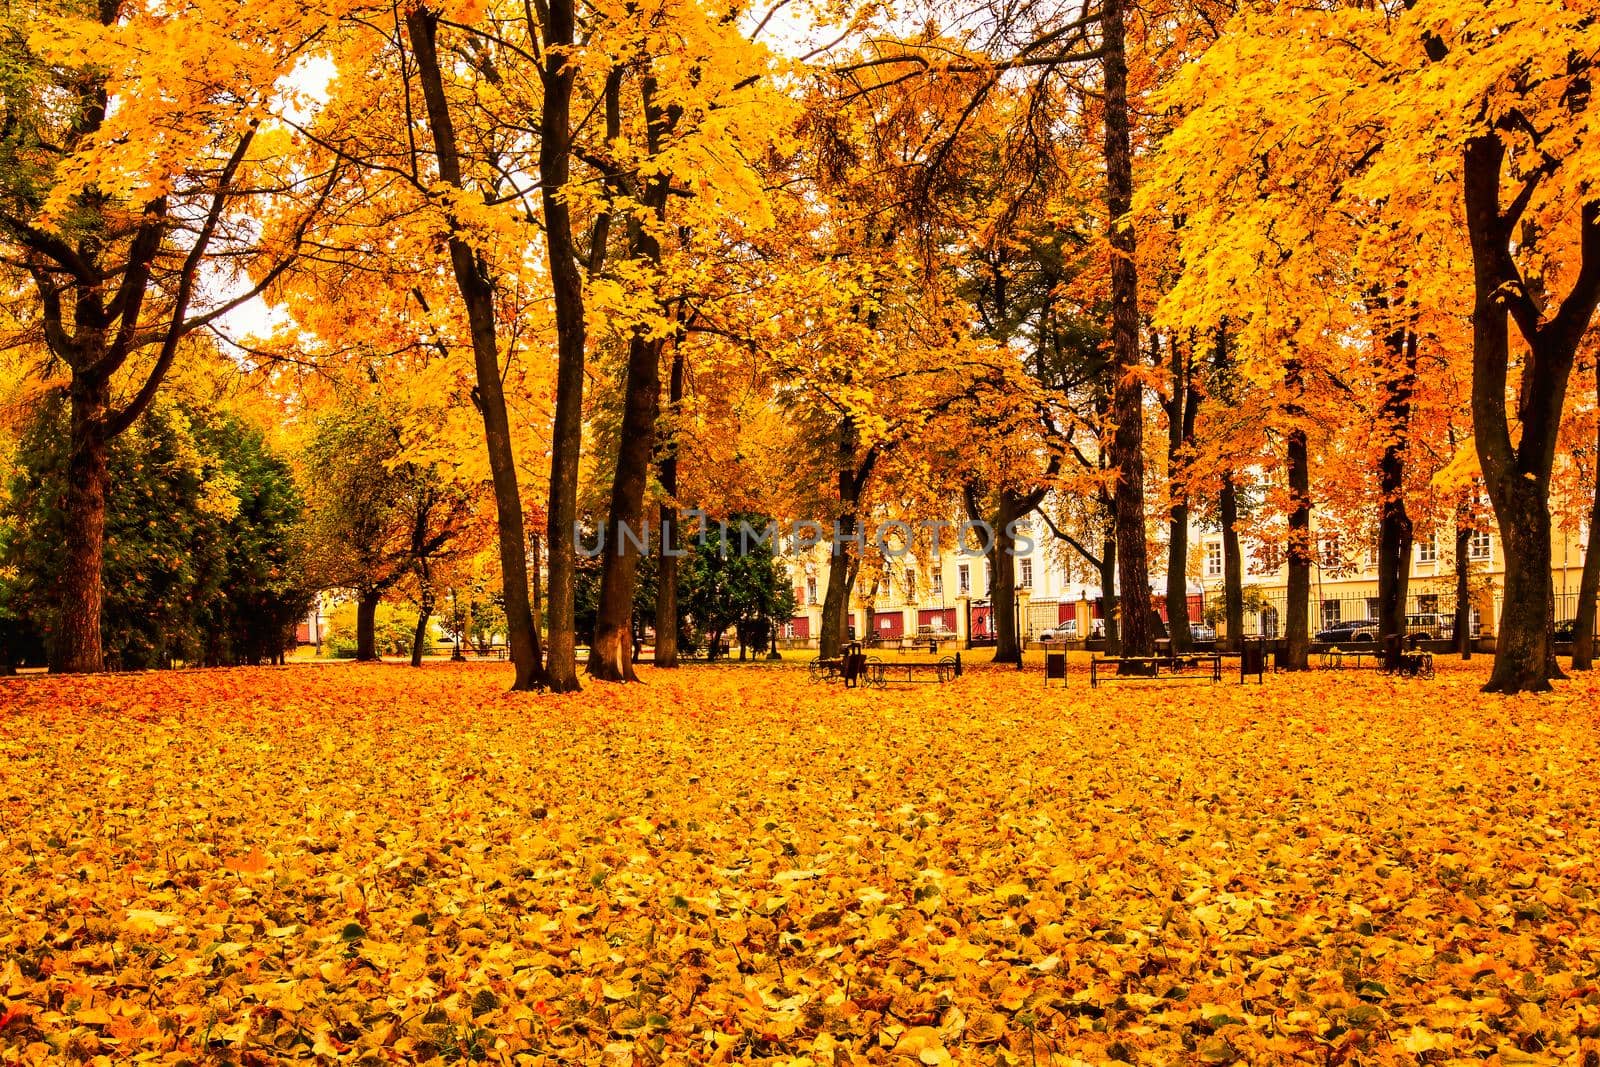 Golden autumn in a city park with trees and fallen yellow leaves on a cloudy day.